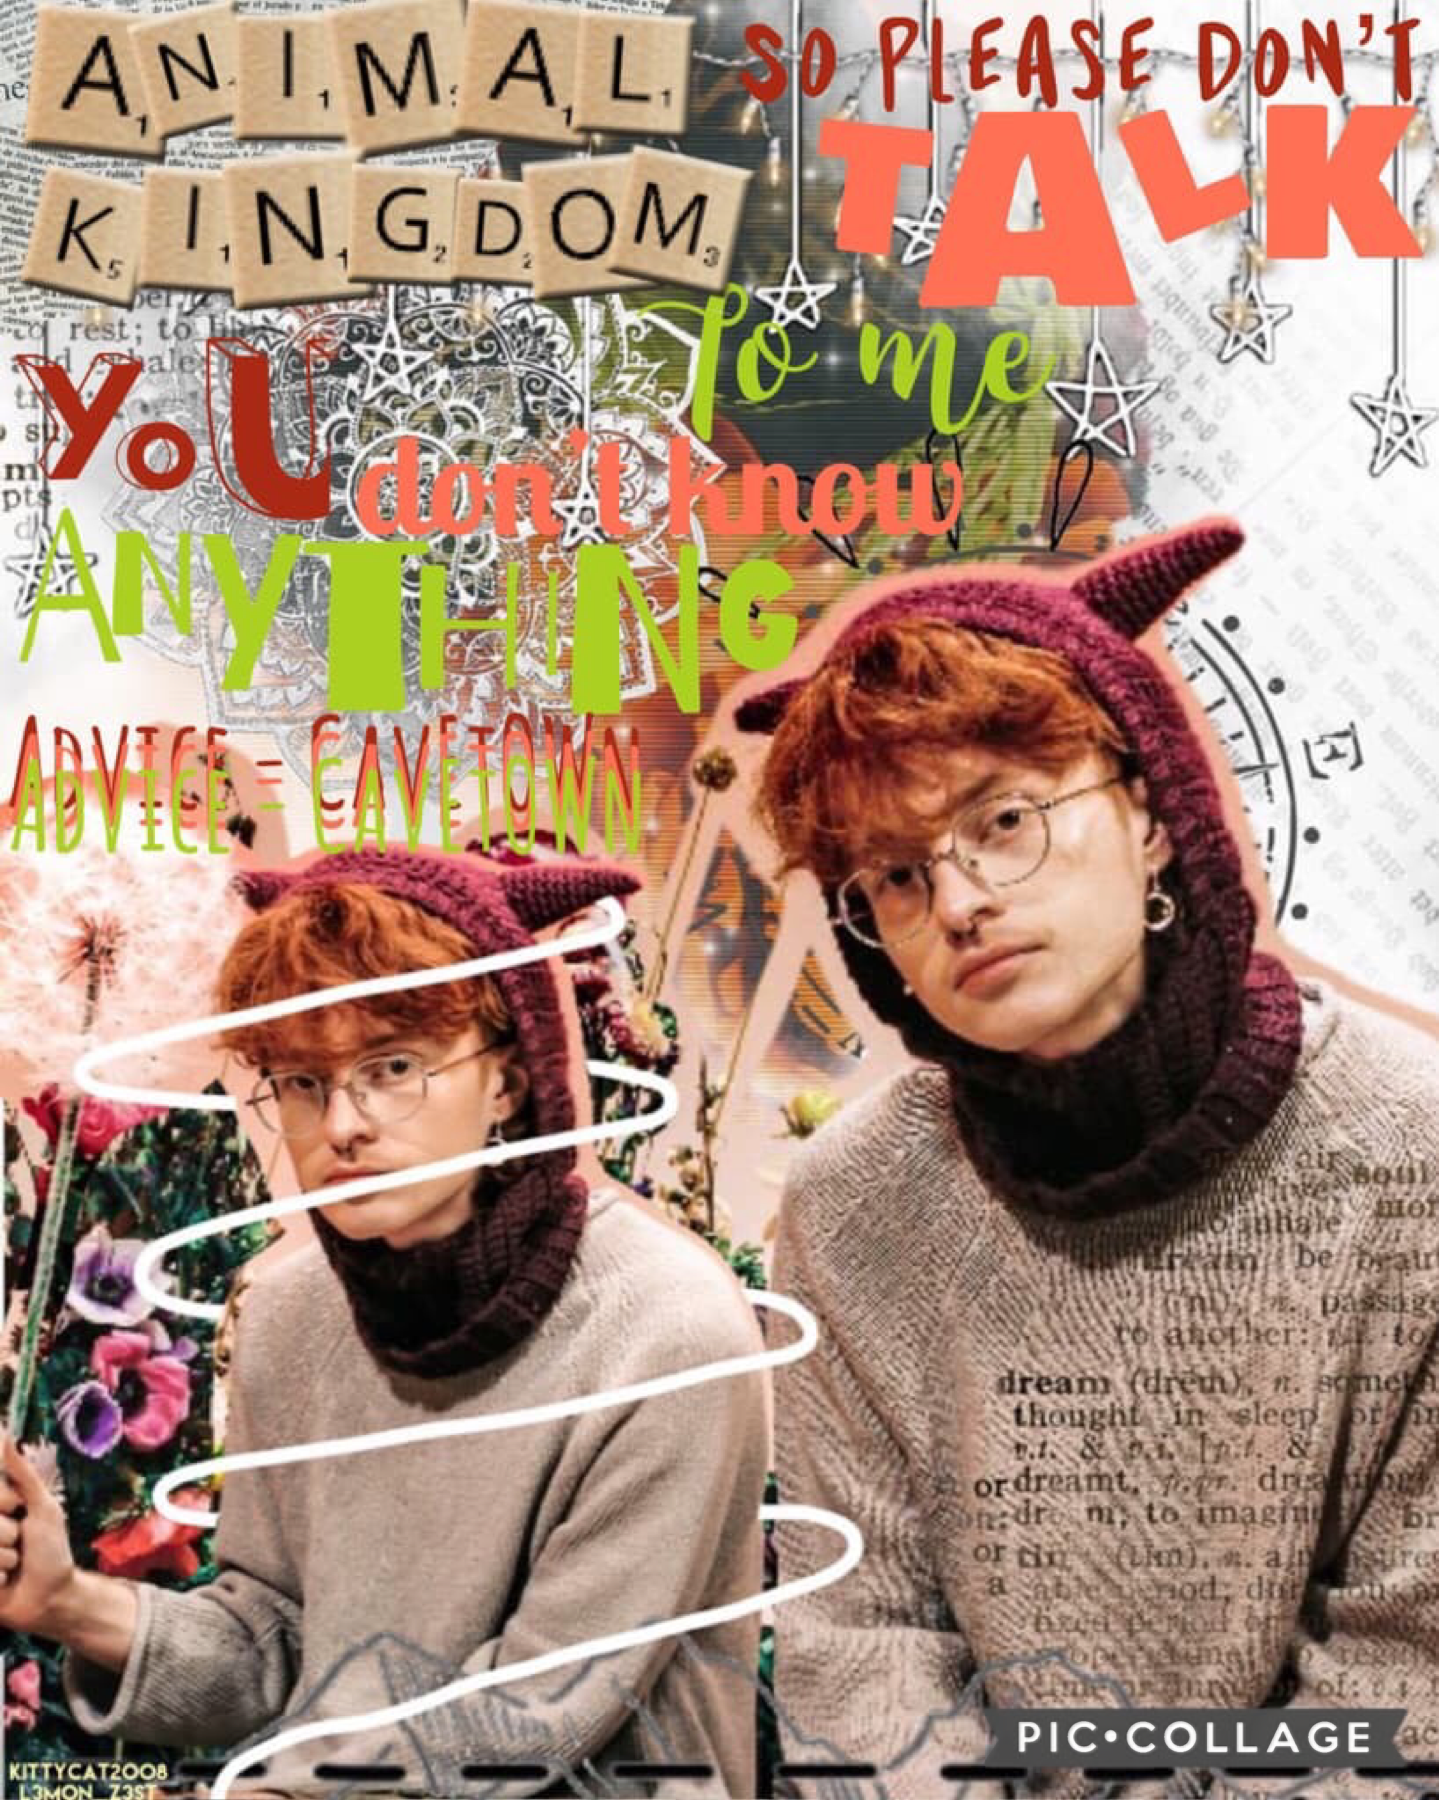 ahhh so happy to get this out :) 
little collab with @KittyCat2008
if you don’t know cavetown you should definitely check him out 
~~~~~~~~~~~~~~~~~~~~~~~~~~~